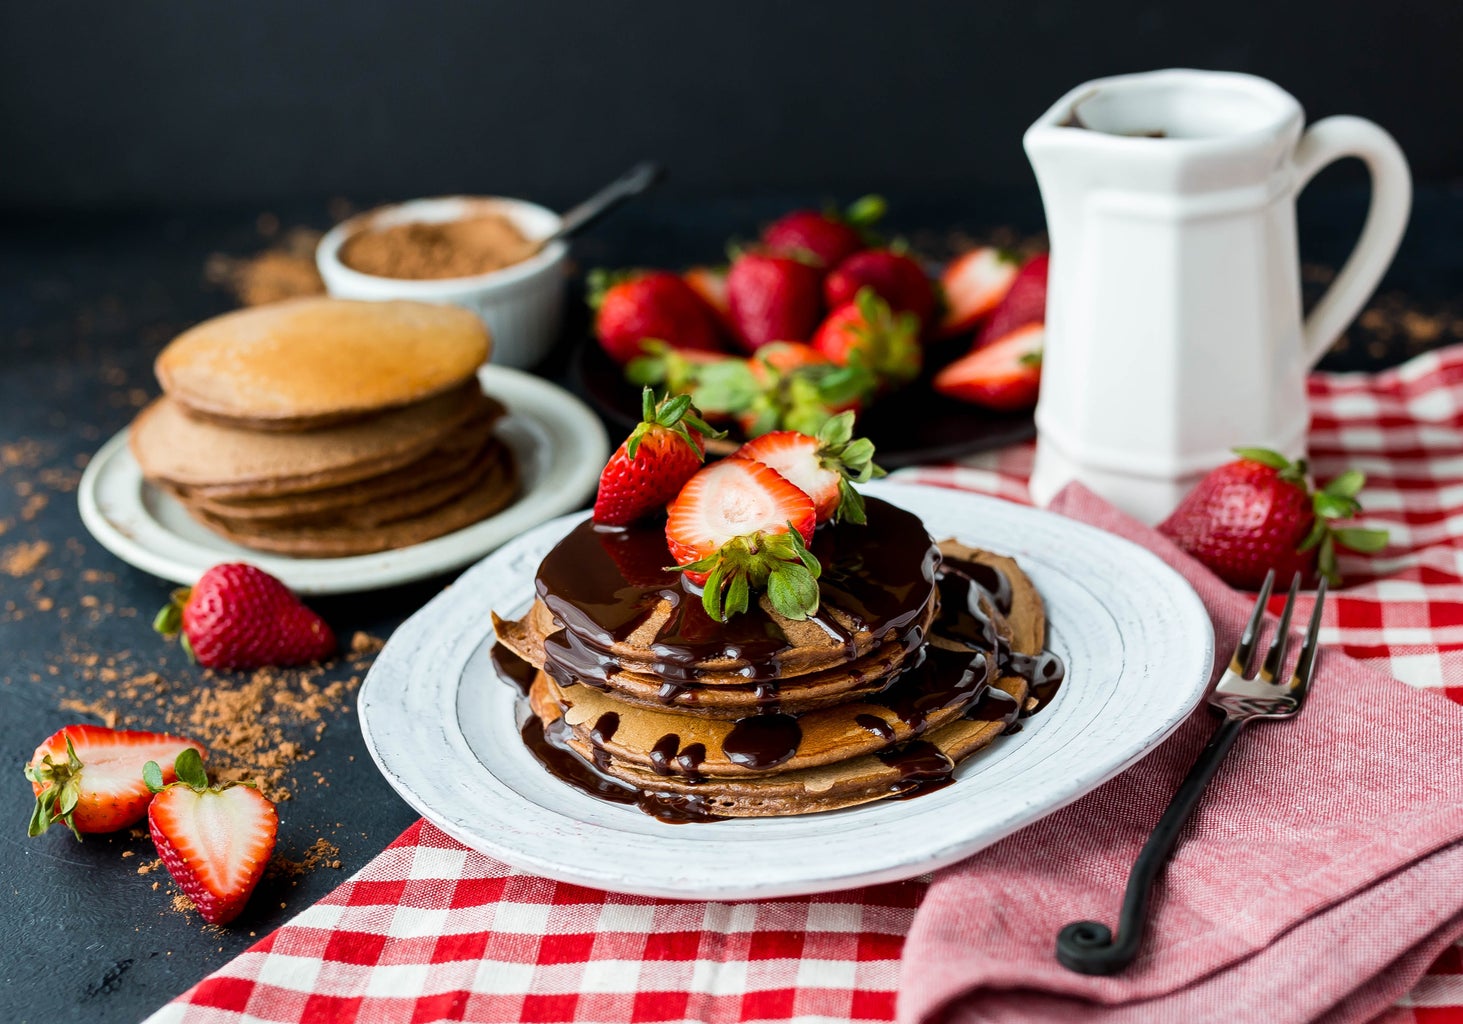 Chocolate pancakes with strawberries